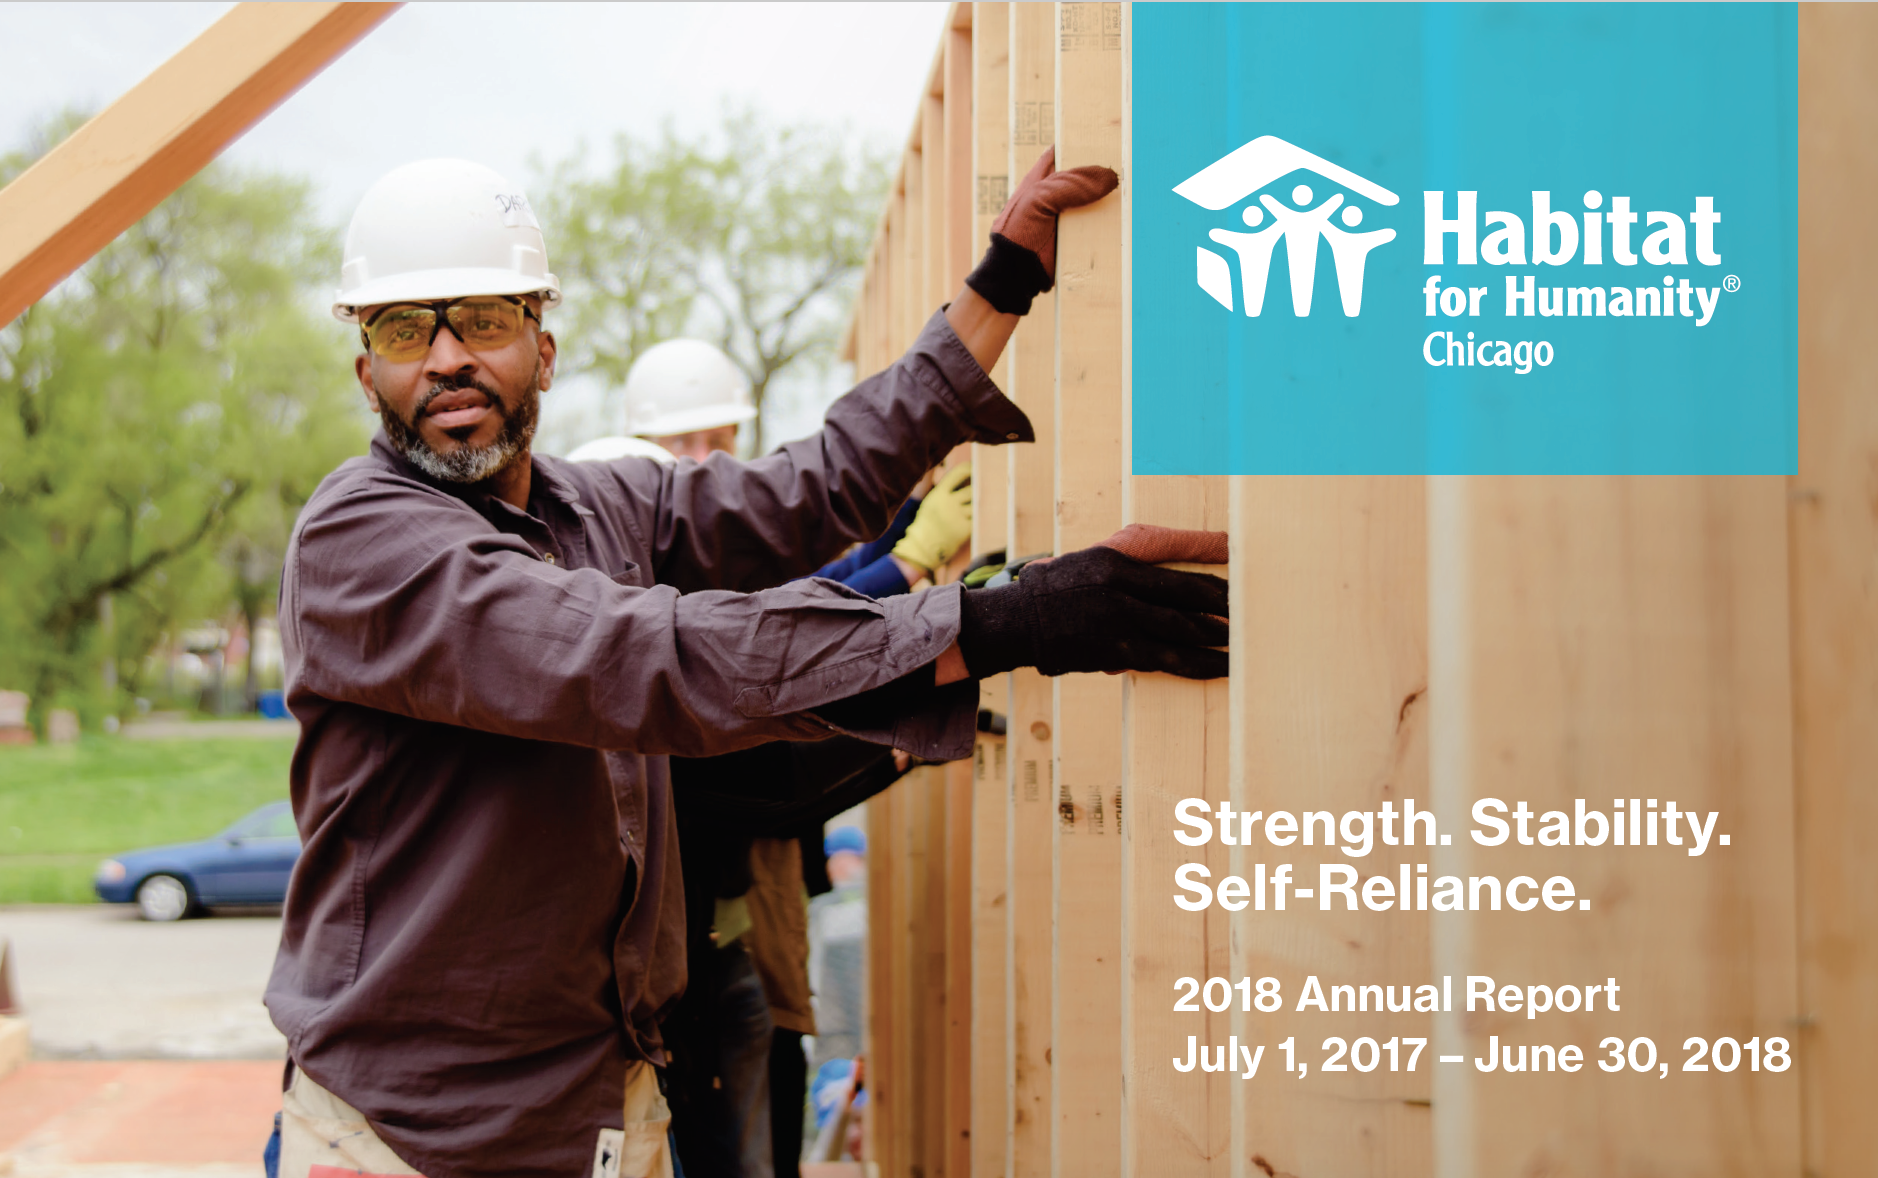 The cover of Habitat Chicago's 2018 Annual Report - A volunteer helps raising a wall on the Habitat Chicago build site